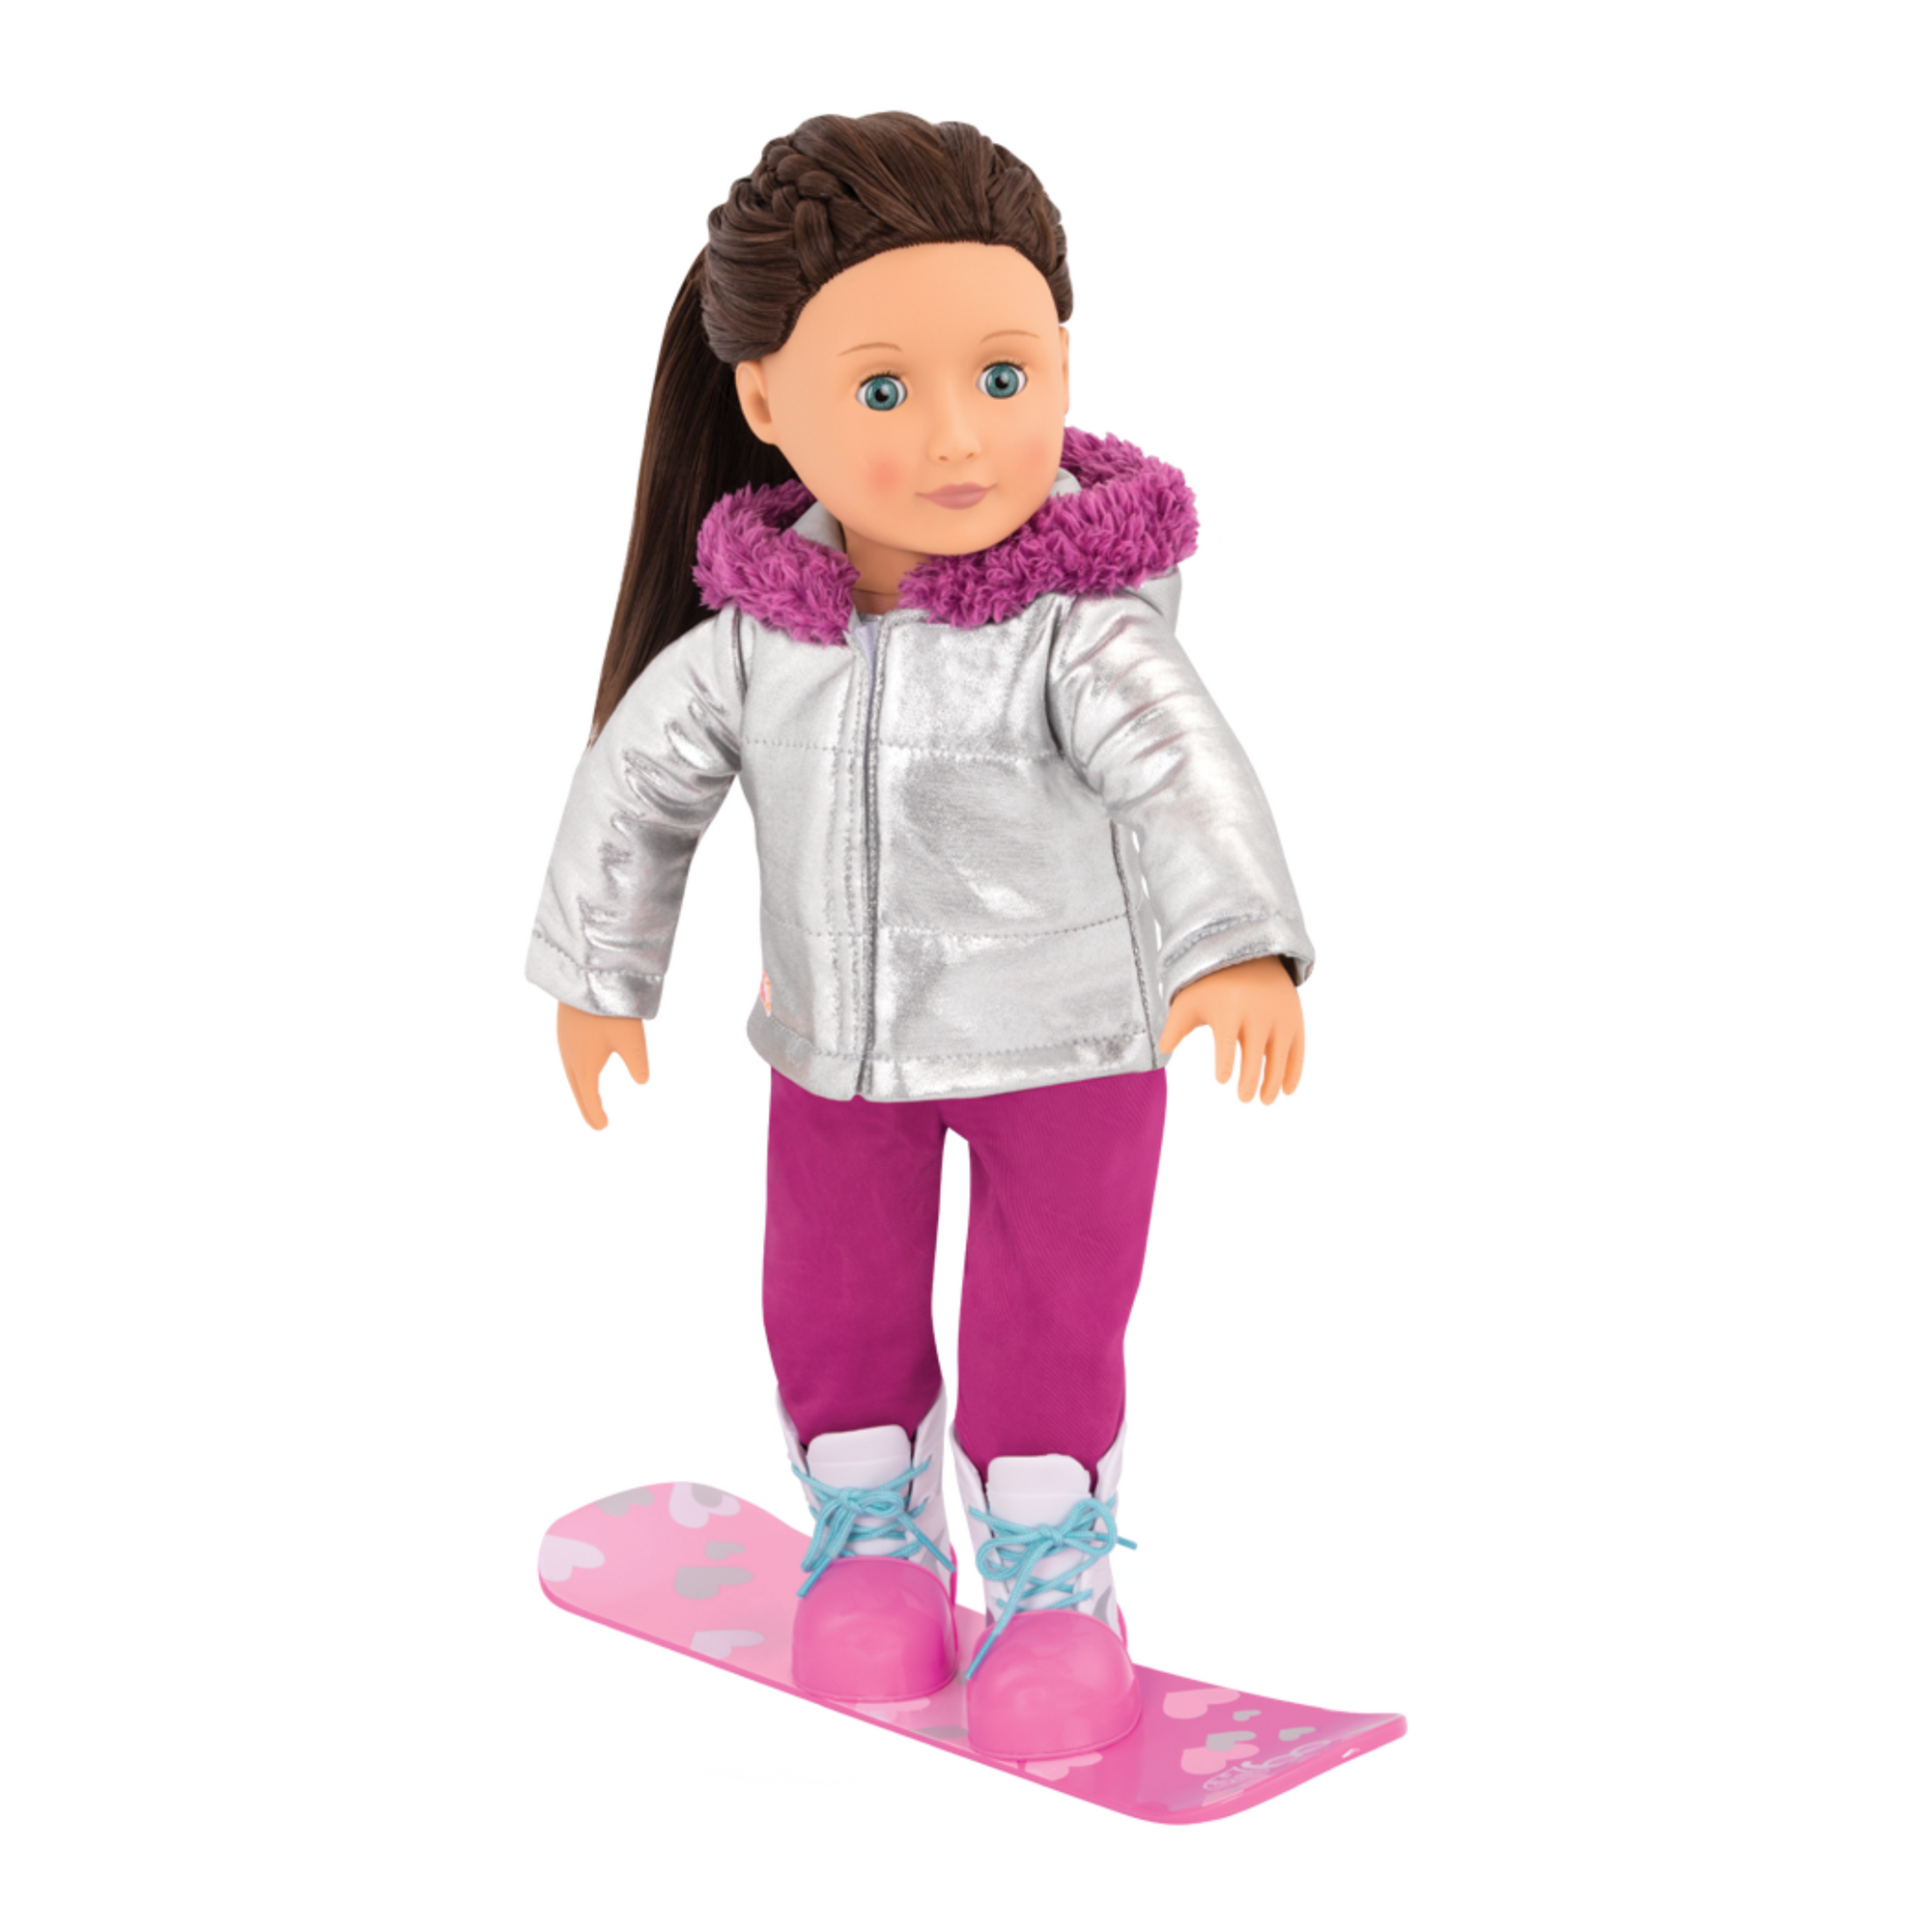 Outfit deluxe snowbord